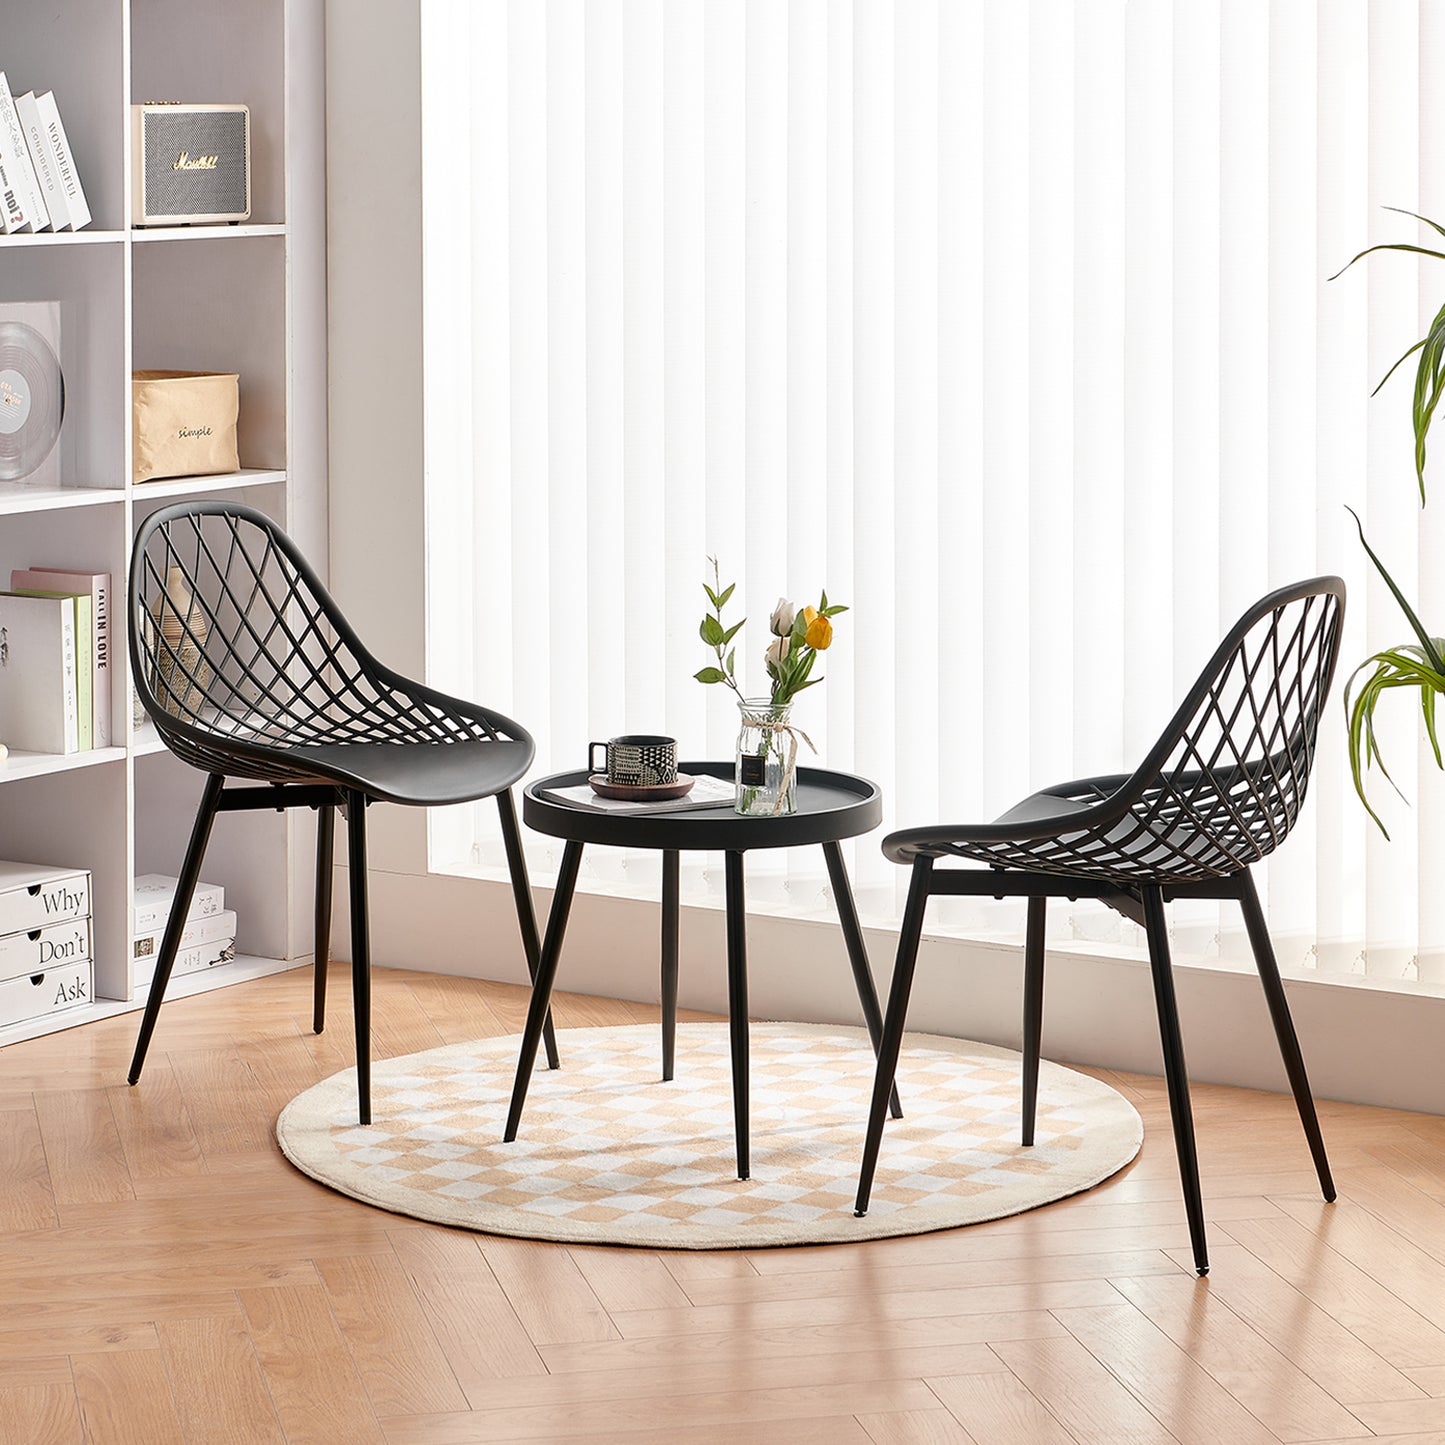 MILAN Hollow Tables and Chairs Iron Legs - Black